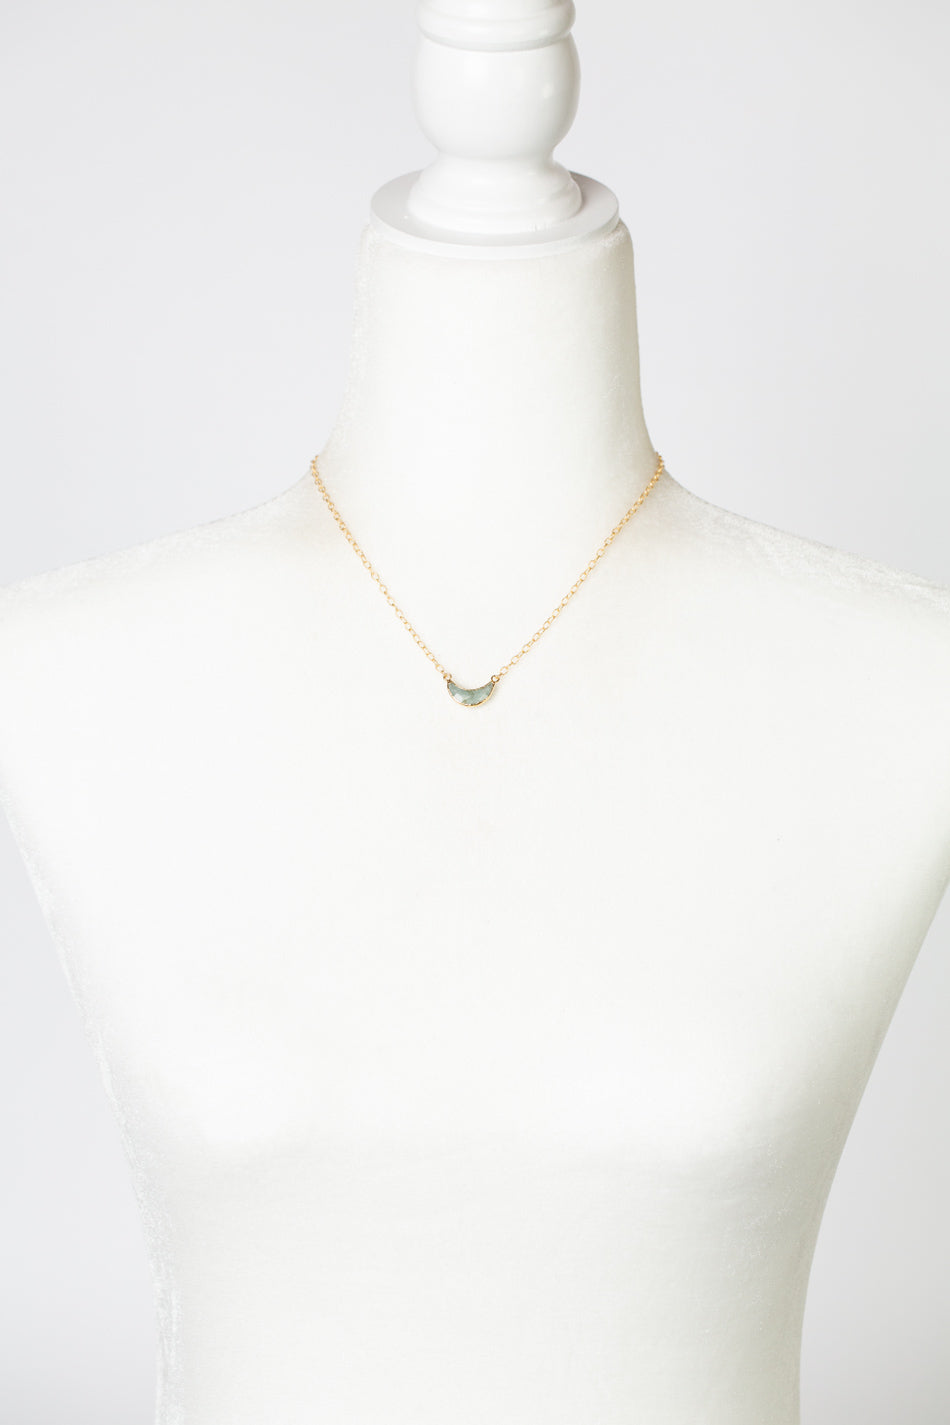 Serenity 15-17" Faceted Aquamarine Crescent Moon Simple Necklace